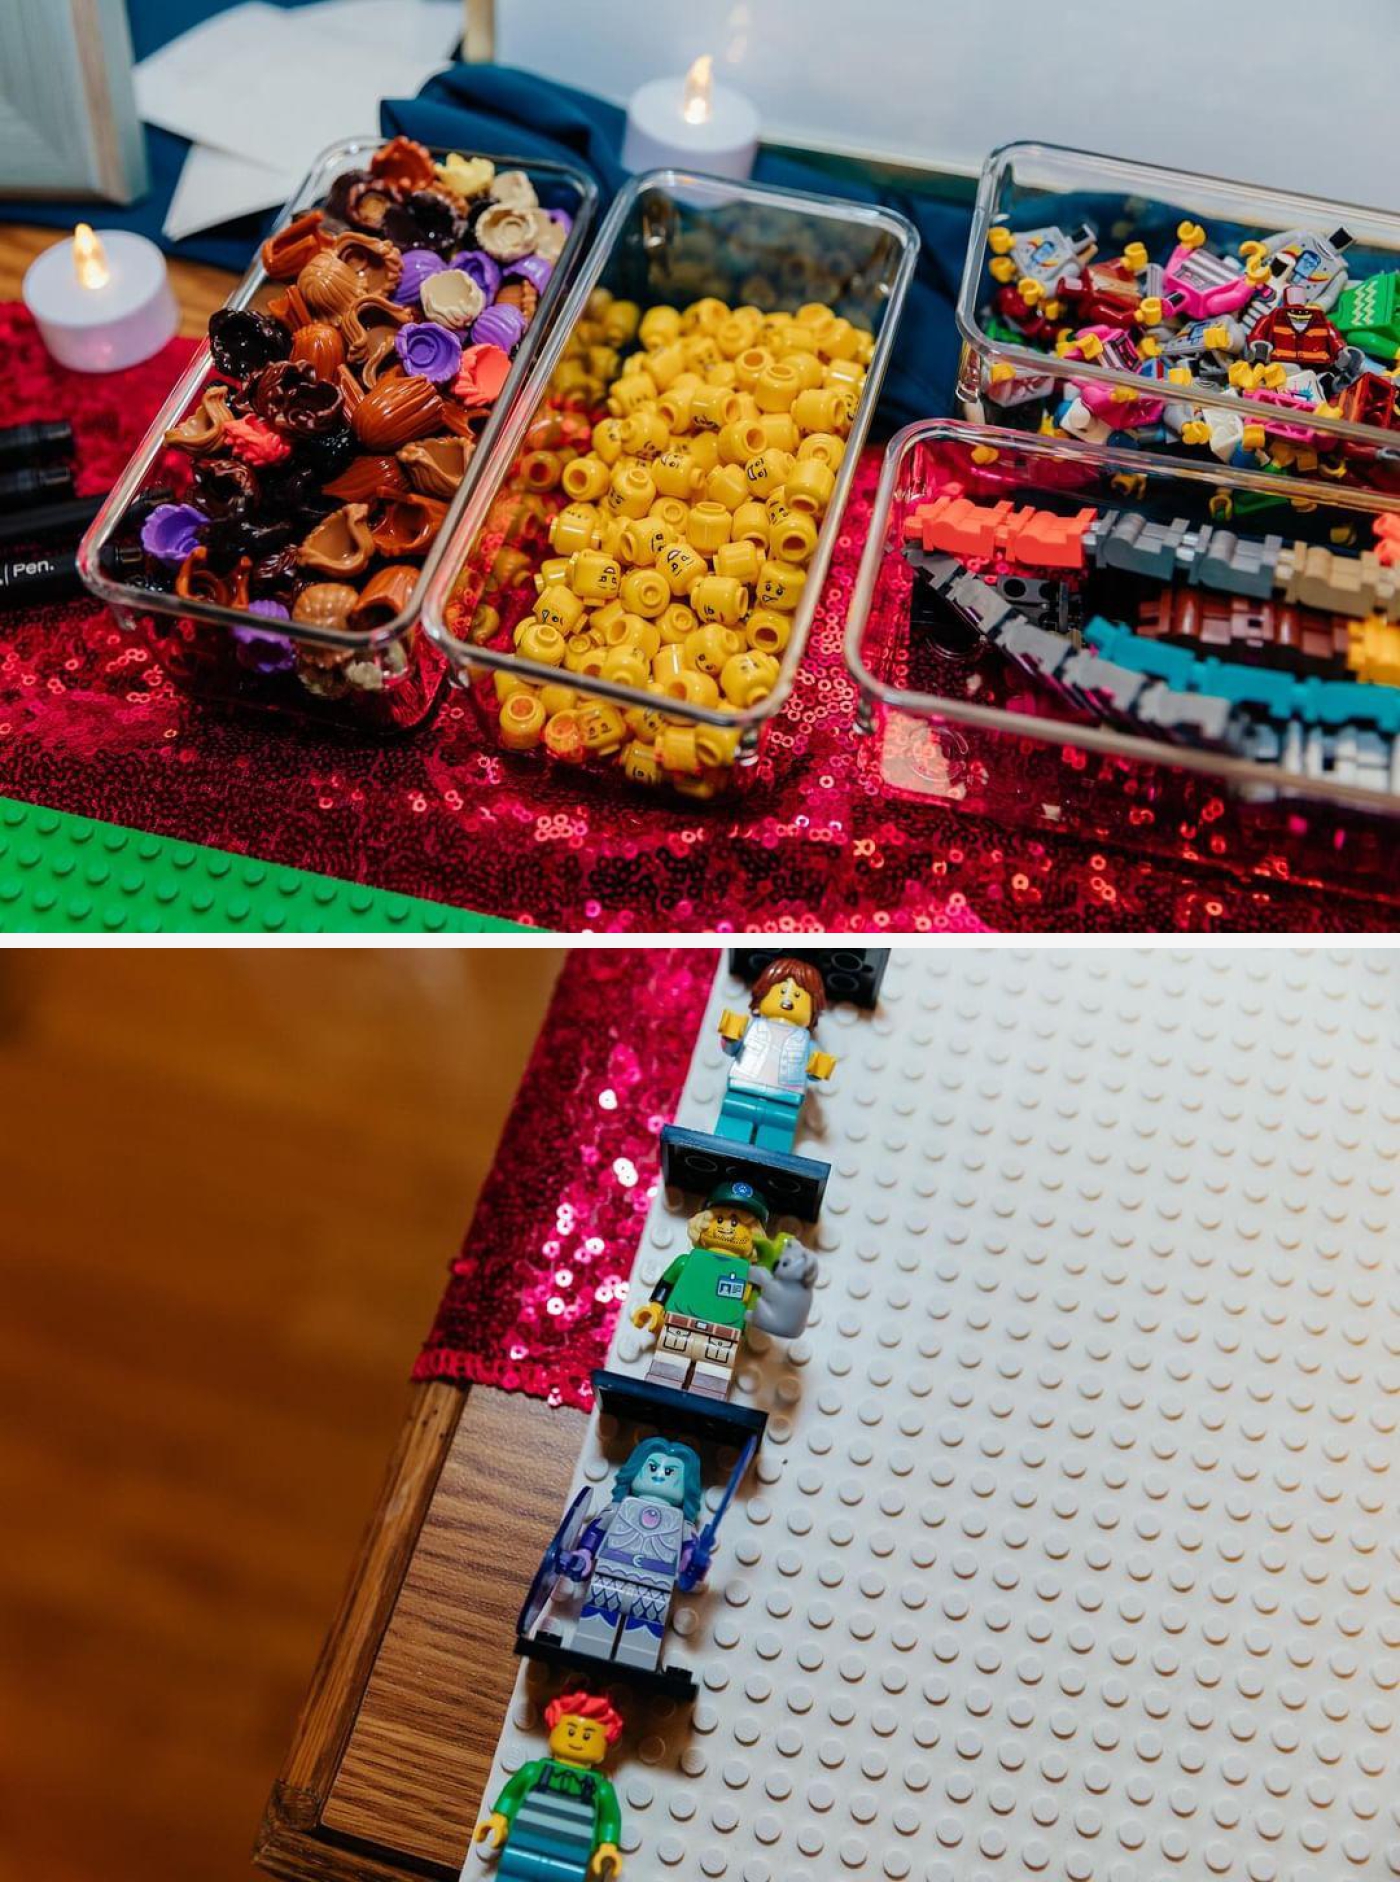 Lego building station for a Star Wars and Lego themed wedding in Denver Colorado